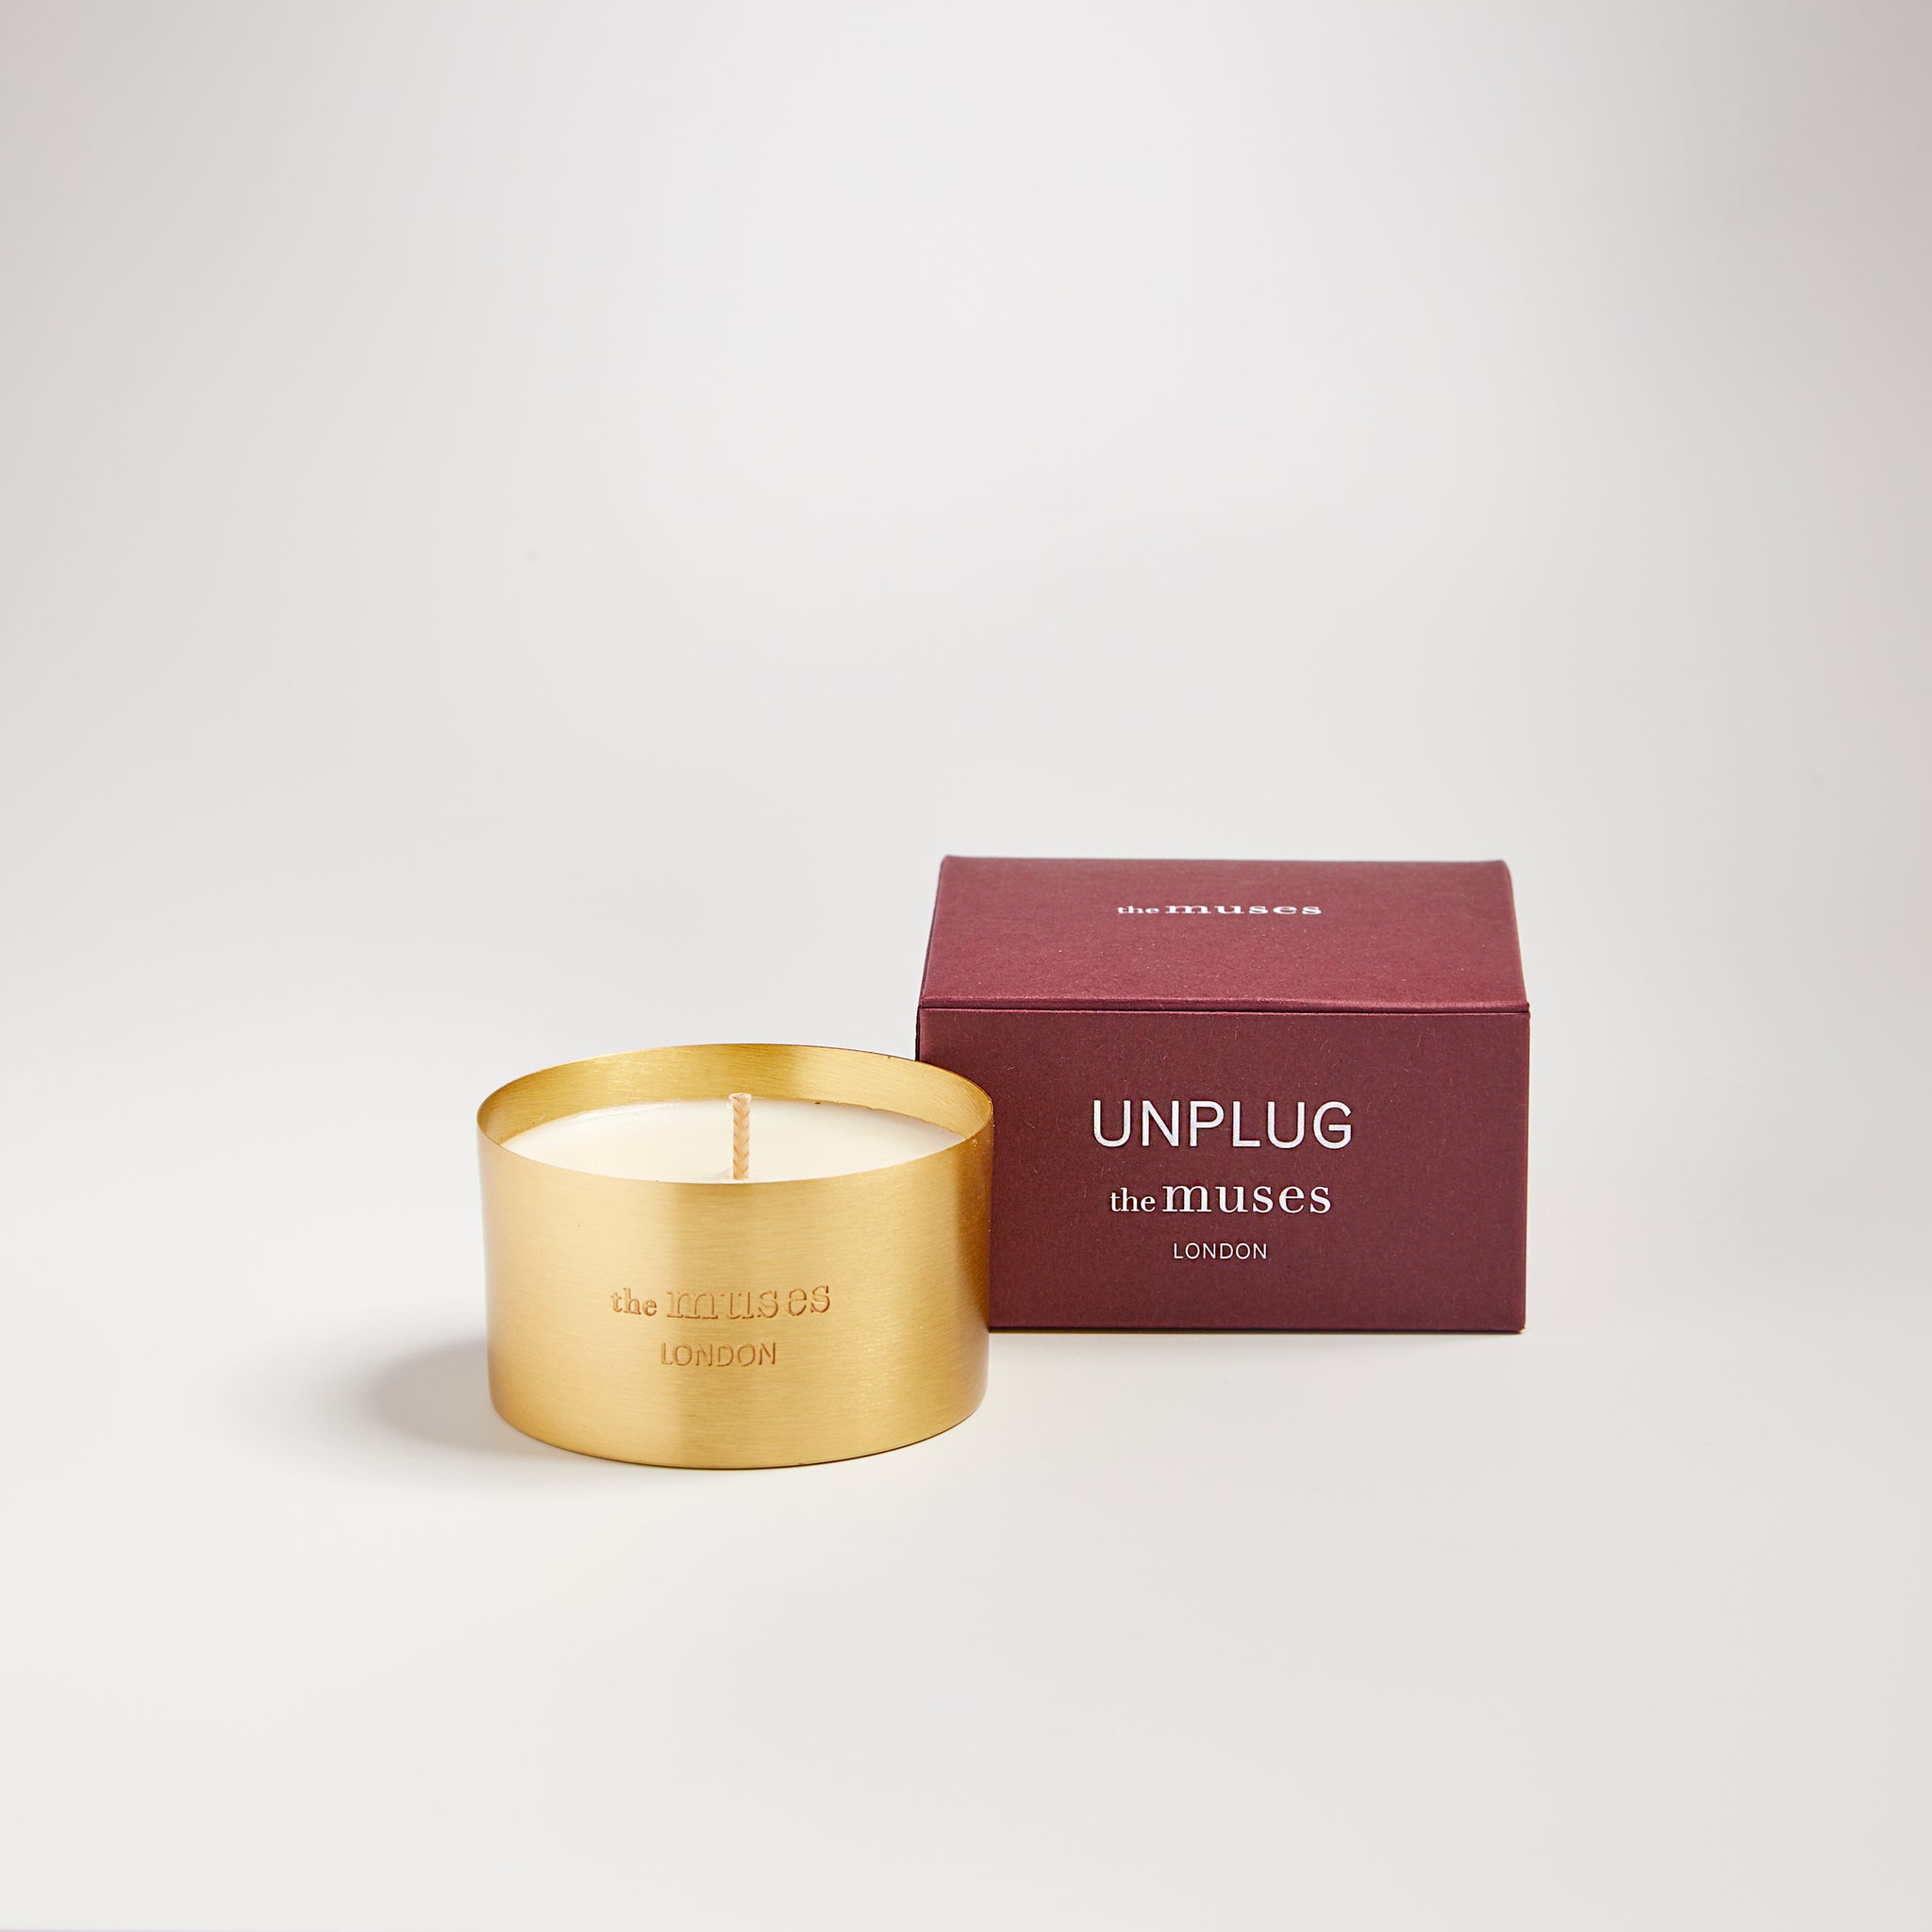 Unplug scented 100% natural wax candle 110g next to claret red candle box. Front